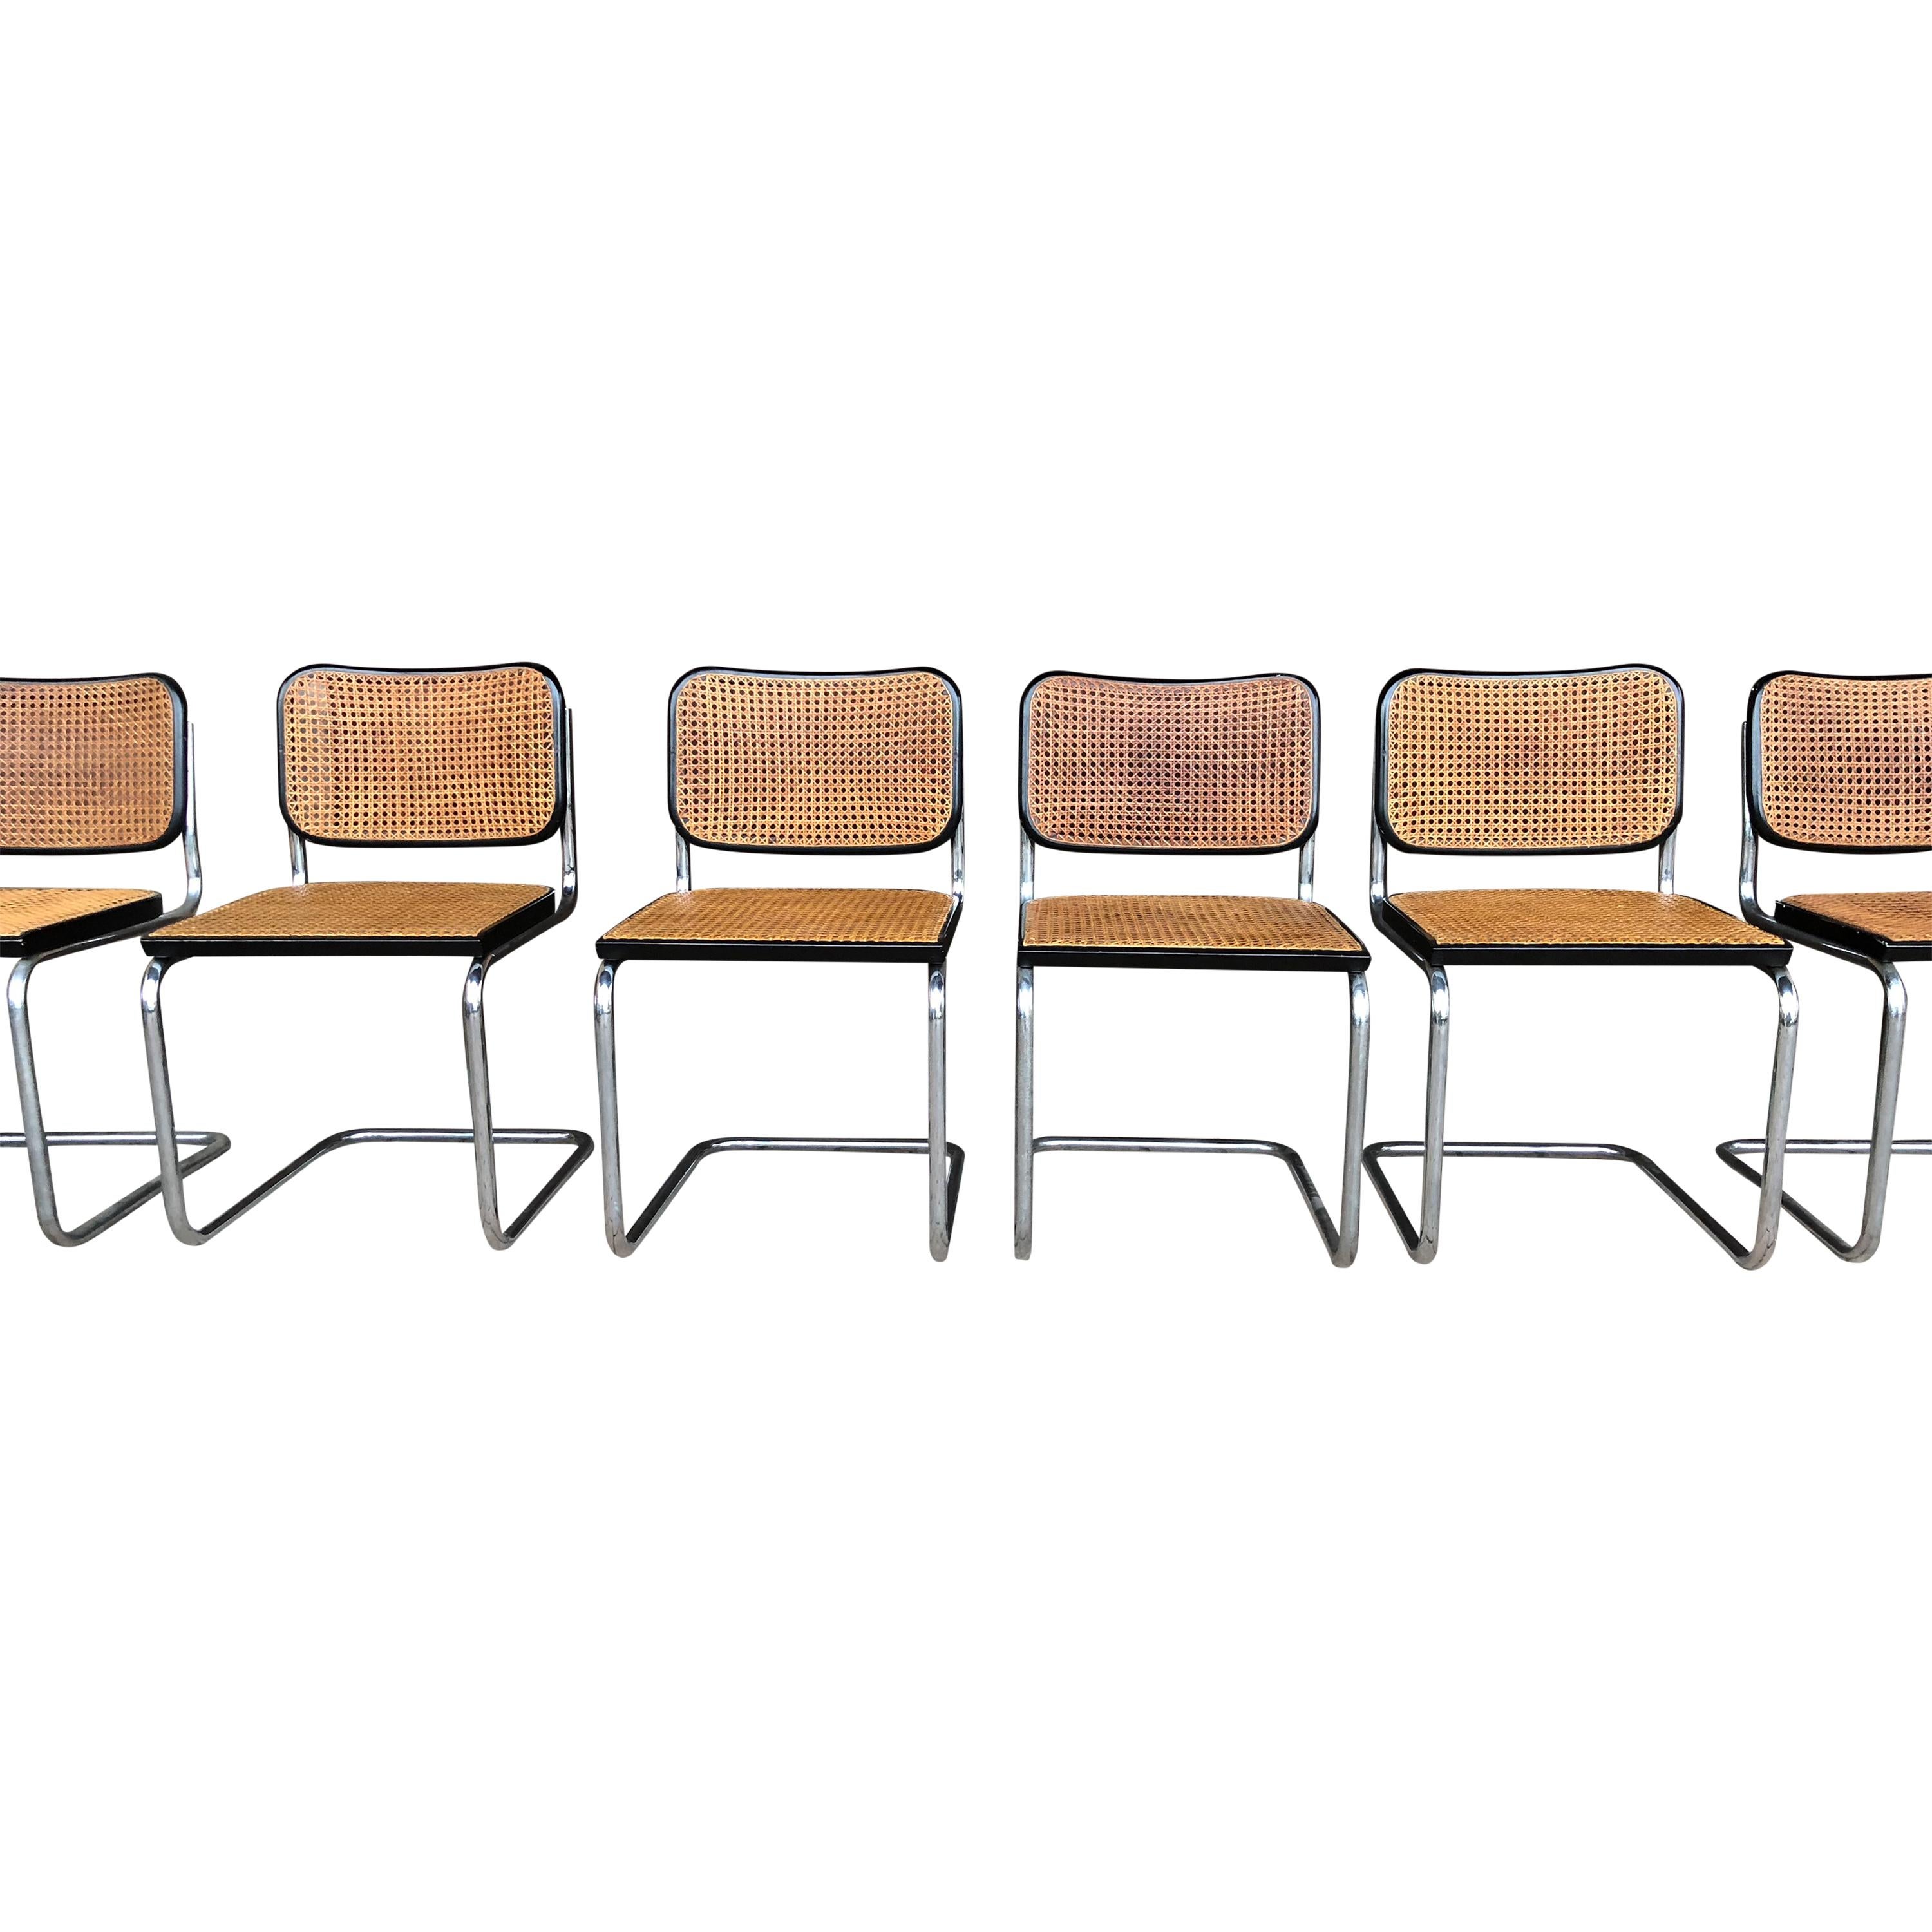 Mid-20th Century Marcel Breuer B32 Cesca Dining Room Chairs for Gavina Knoll, 1963, Set of 8 For Sale